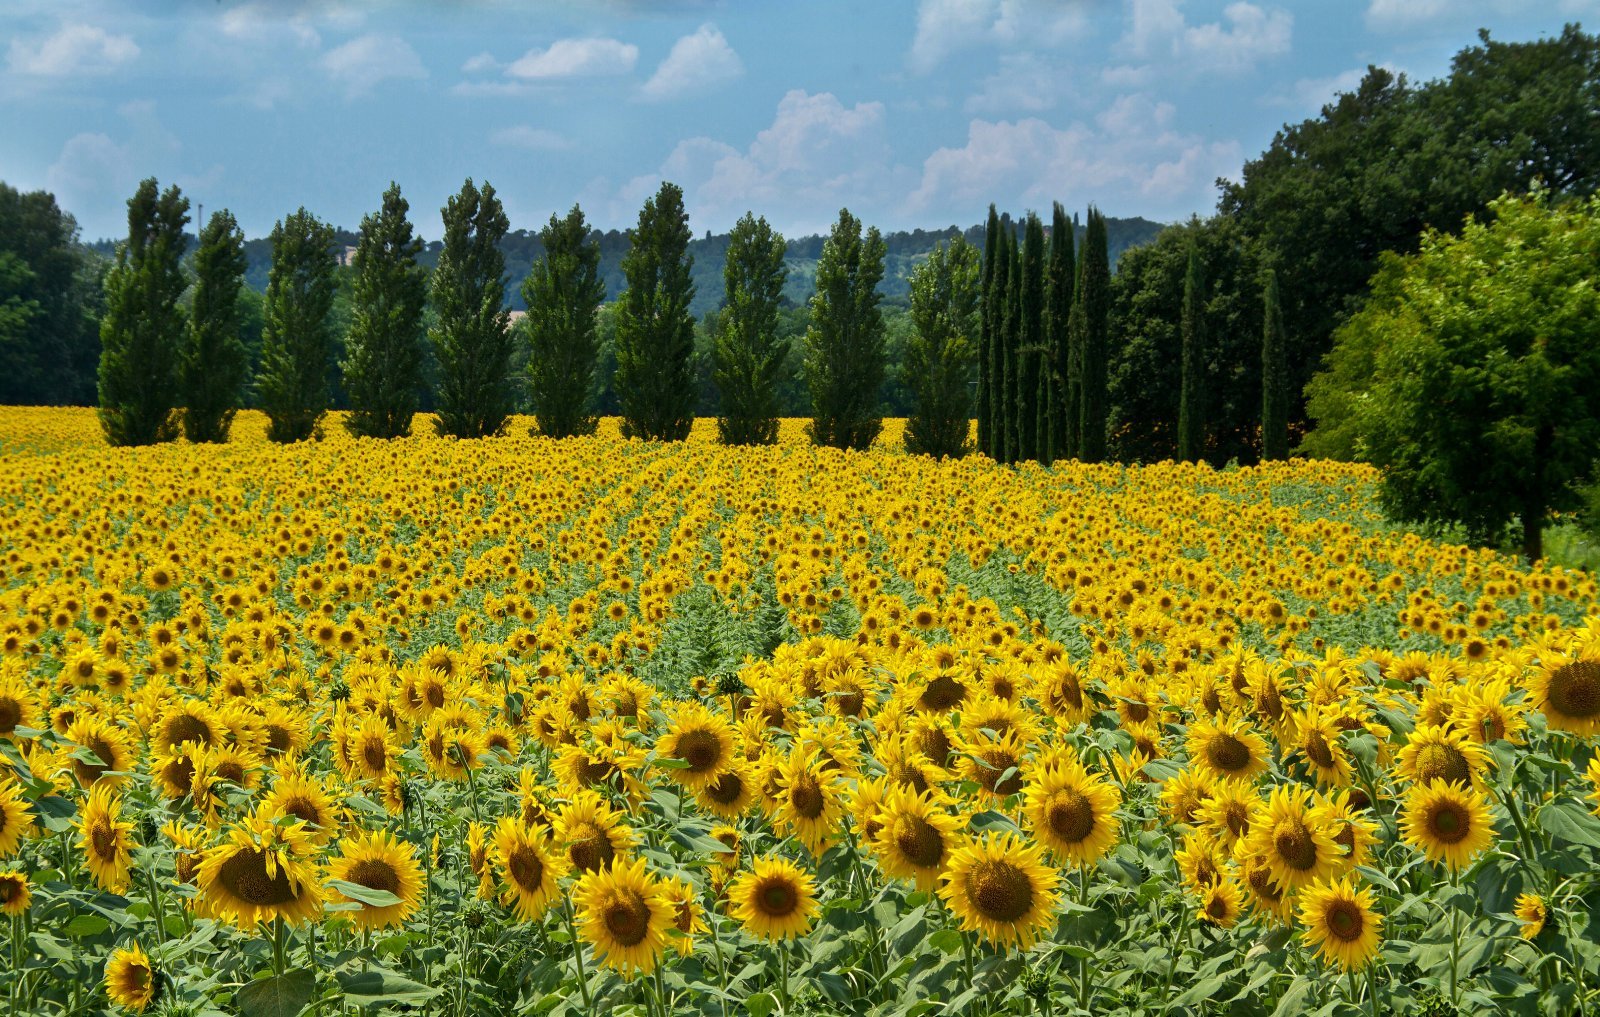 <p class="wp-caption-text">Image Credit: Shutterstock / Christopher Salerno</p>  <p><span>Tuscany’s Sunflower Festival celebrates the bloom of sunflowers across the region, turning the countryside into a sea of yellow. The festival period is an excellent time for scenic drives and photography.</span></p> <p><b>Insider’s Tip: </b><span>The area around San Gimignano offers some of the most picturesque fields.</span></p> <p><b>When to Travel: </b><span>July to August</span></p> <p><b>How to Get There: </b><span>Fly into Florence or Pisa, then rent a car to explore the Tuscan countryside.</span></p>